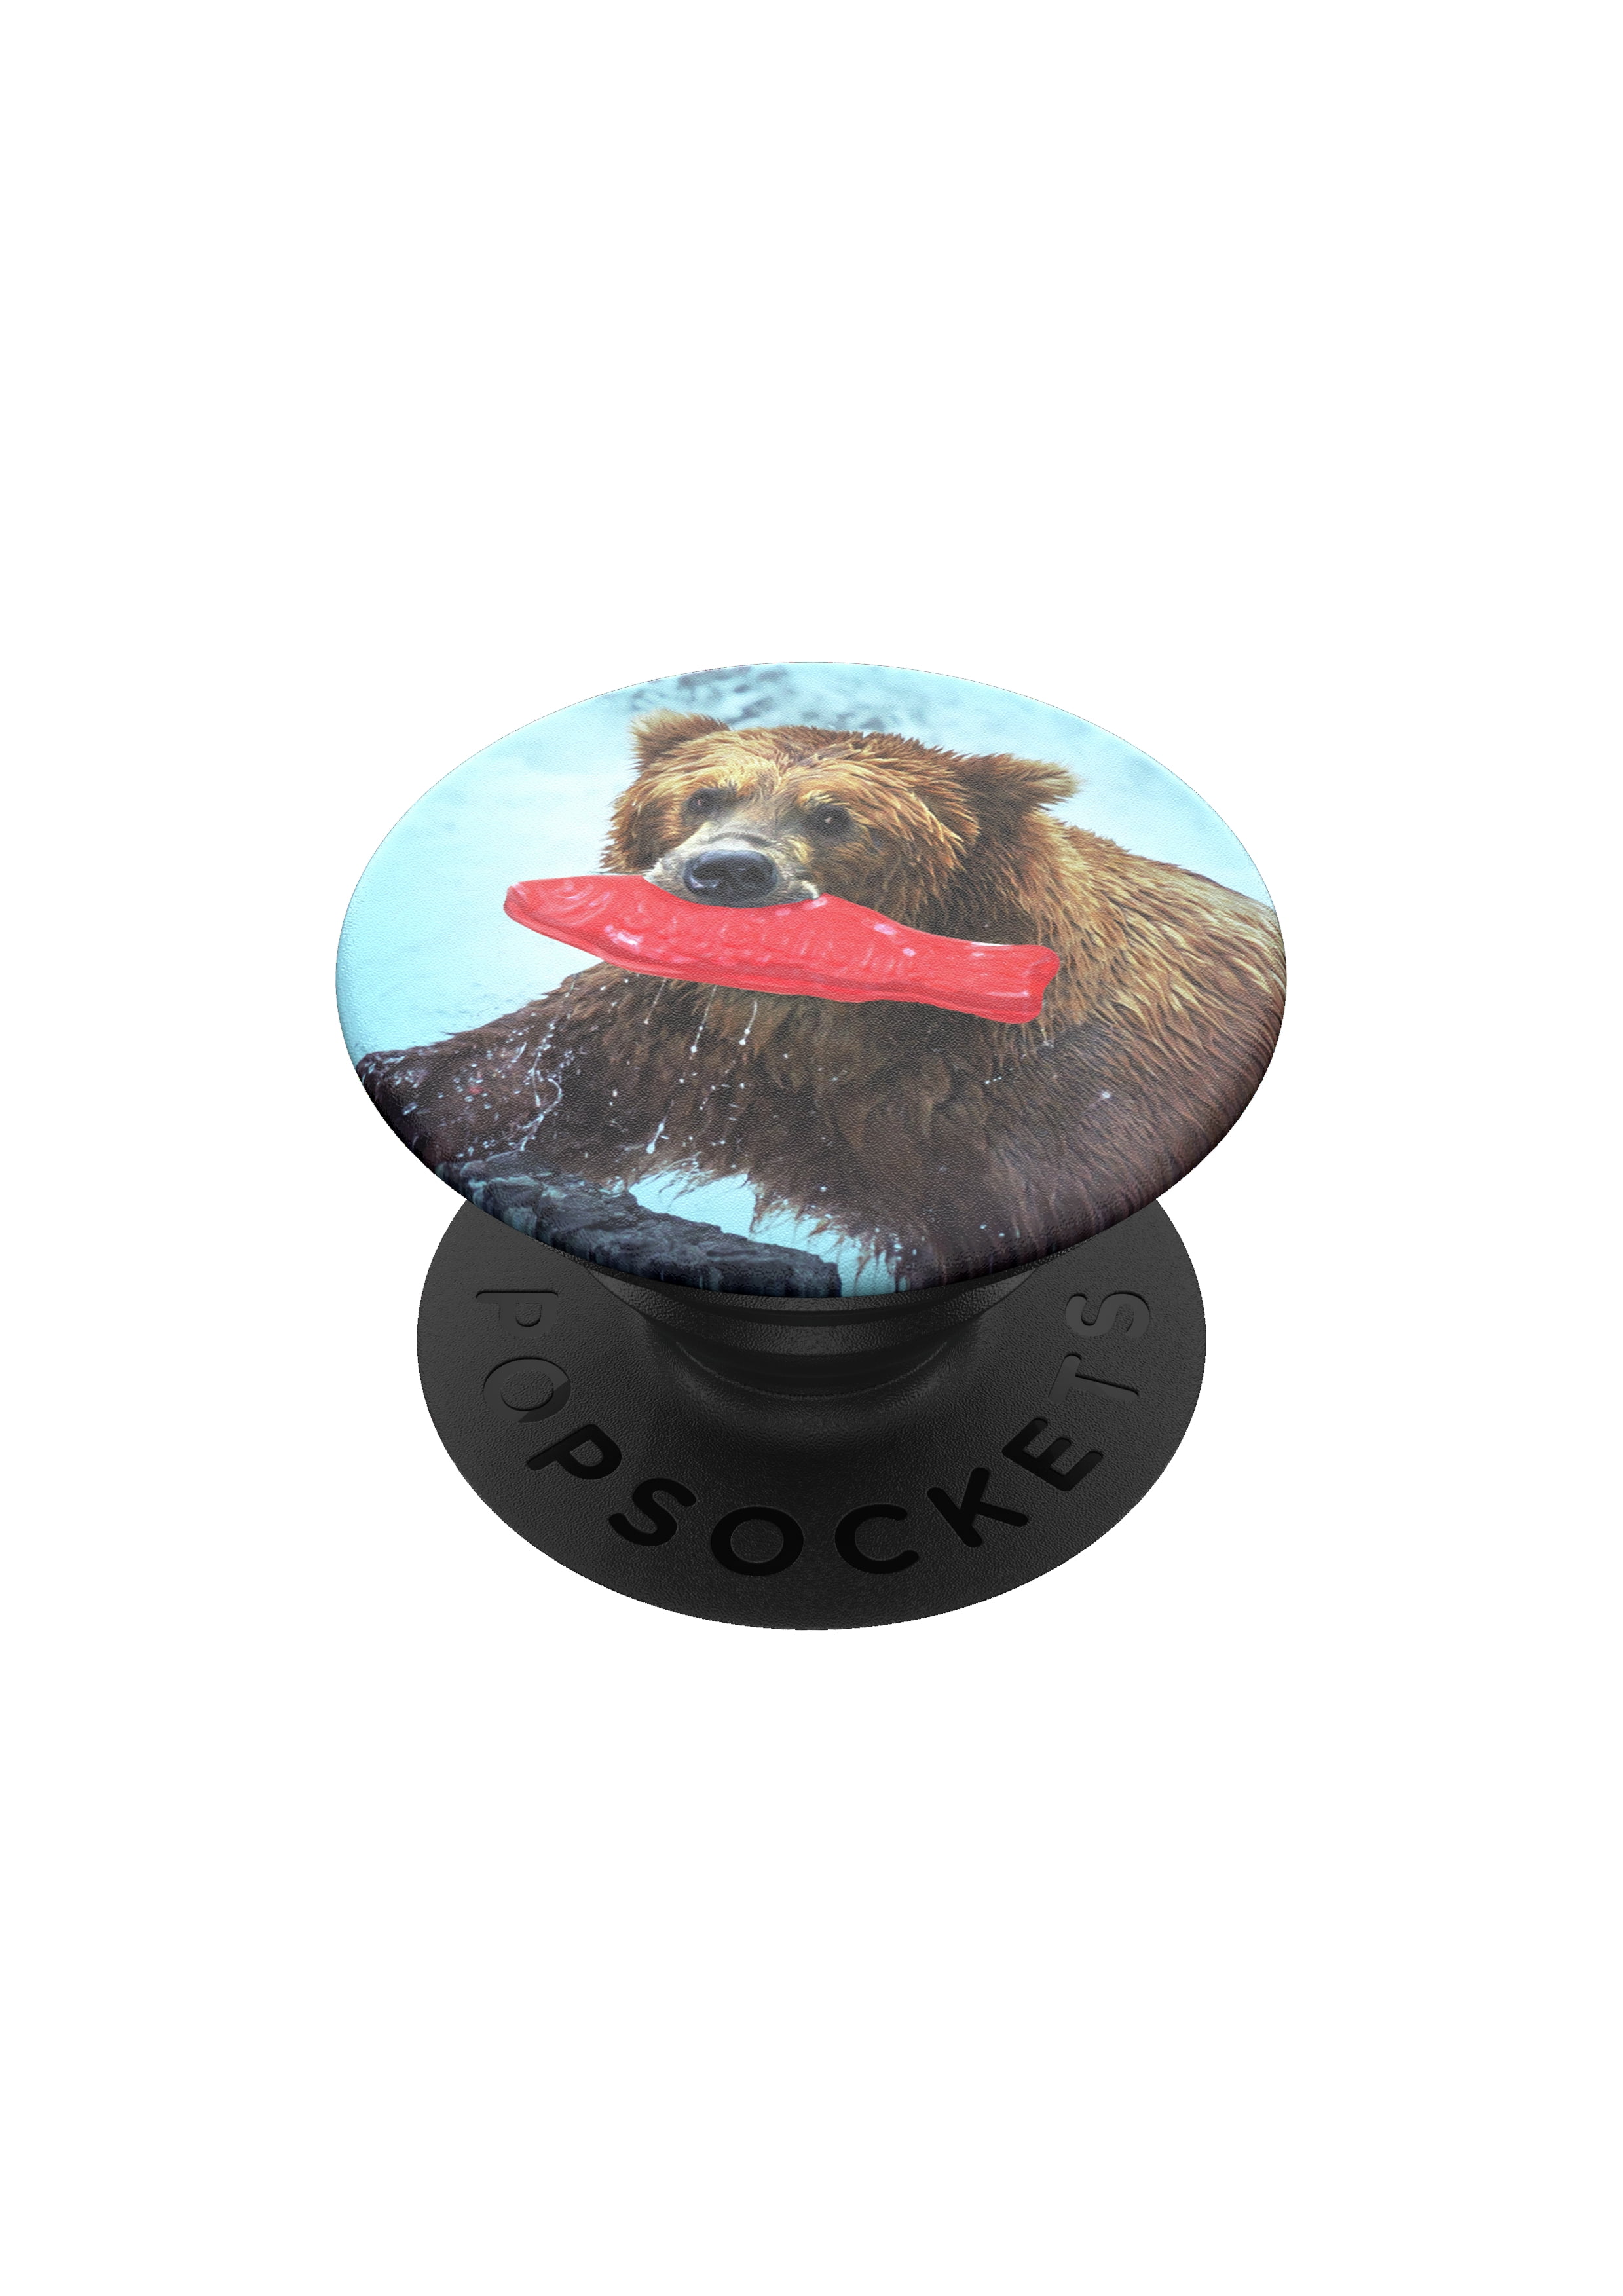  What's A Ligma Survivor? - Funny Ligma Meme PopSockets PopGrip:  Swappable Grip for Phones & Tablets : Cell Phones & Accessories